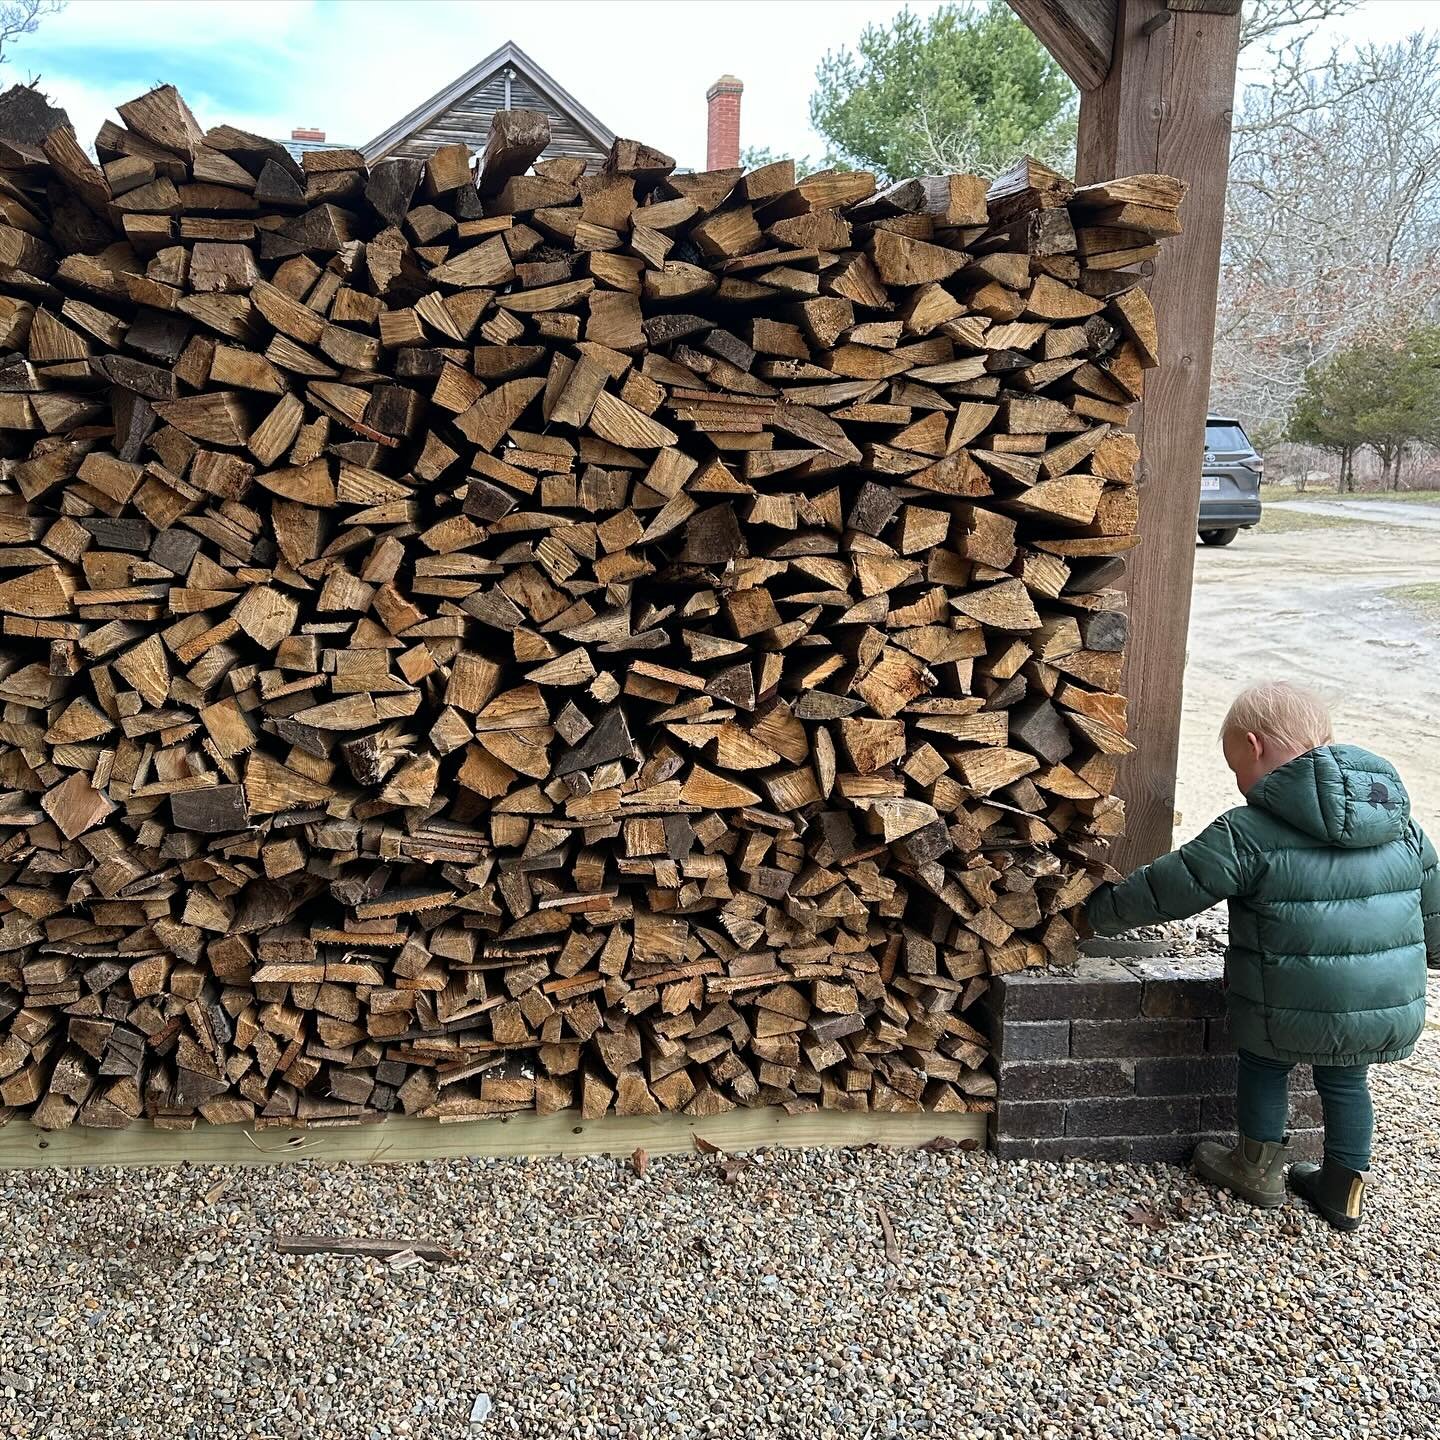 I&rsquo;ve loved Woodpiles for a long time. Driving dirt roads anywhere in New England, you can see some lovely ones, pieces of vernacular art I&rsquo;d take side by side with an Andy Goldsworthy sculpture any day.

Now that I have a wood burning kil